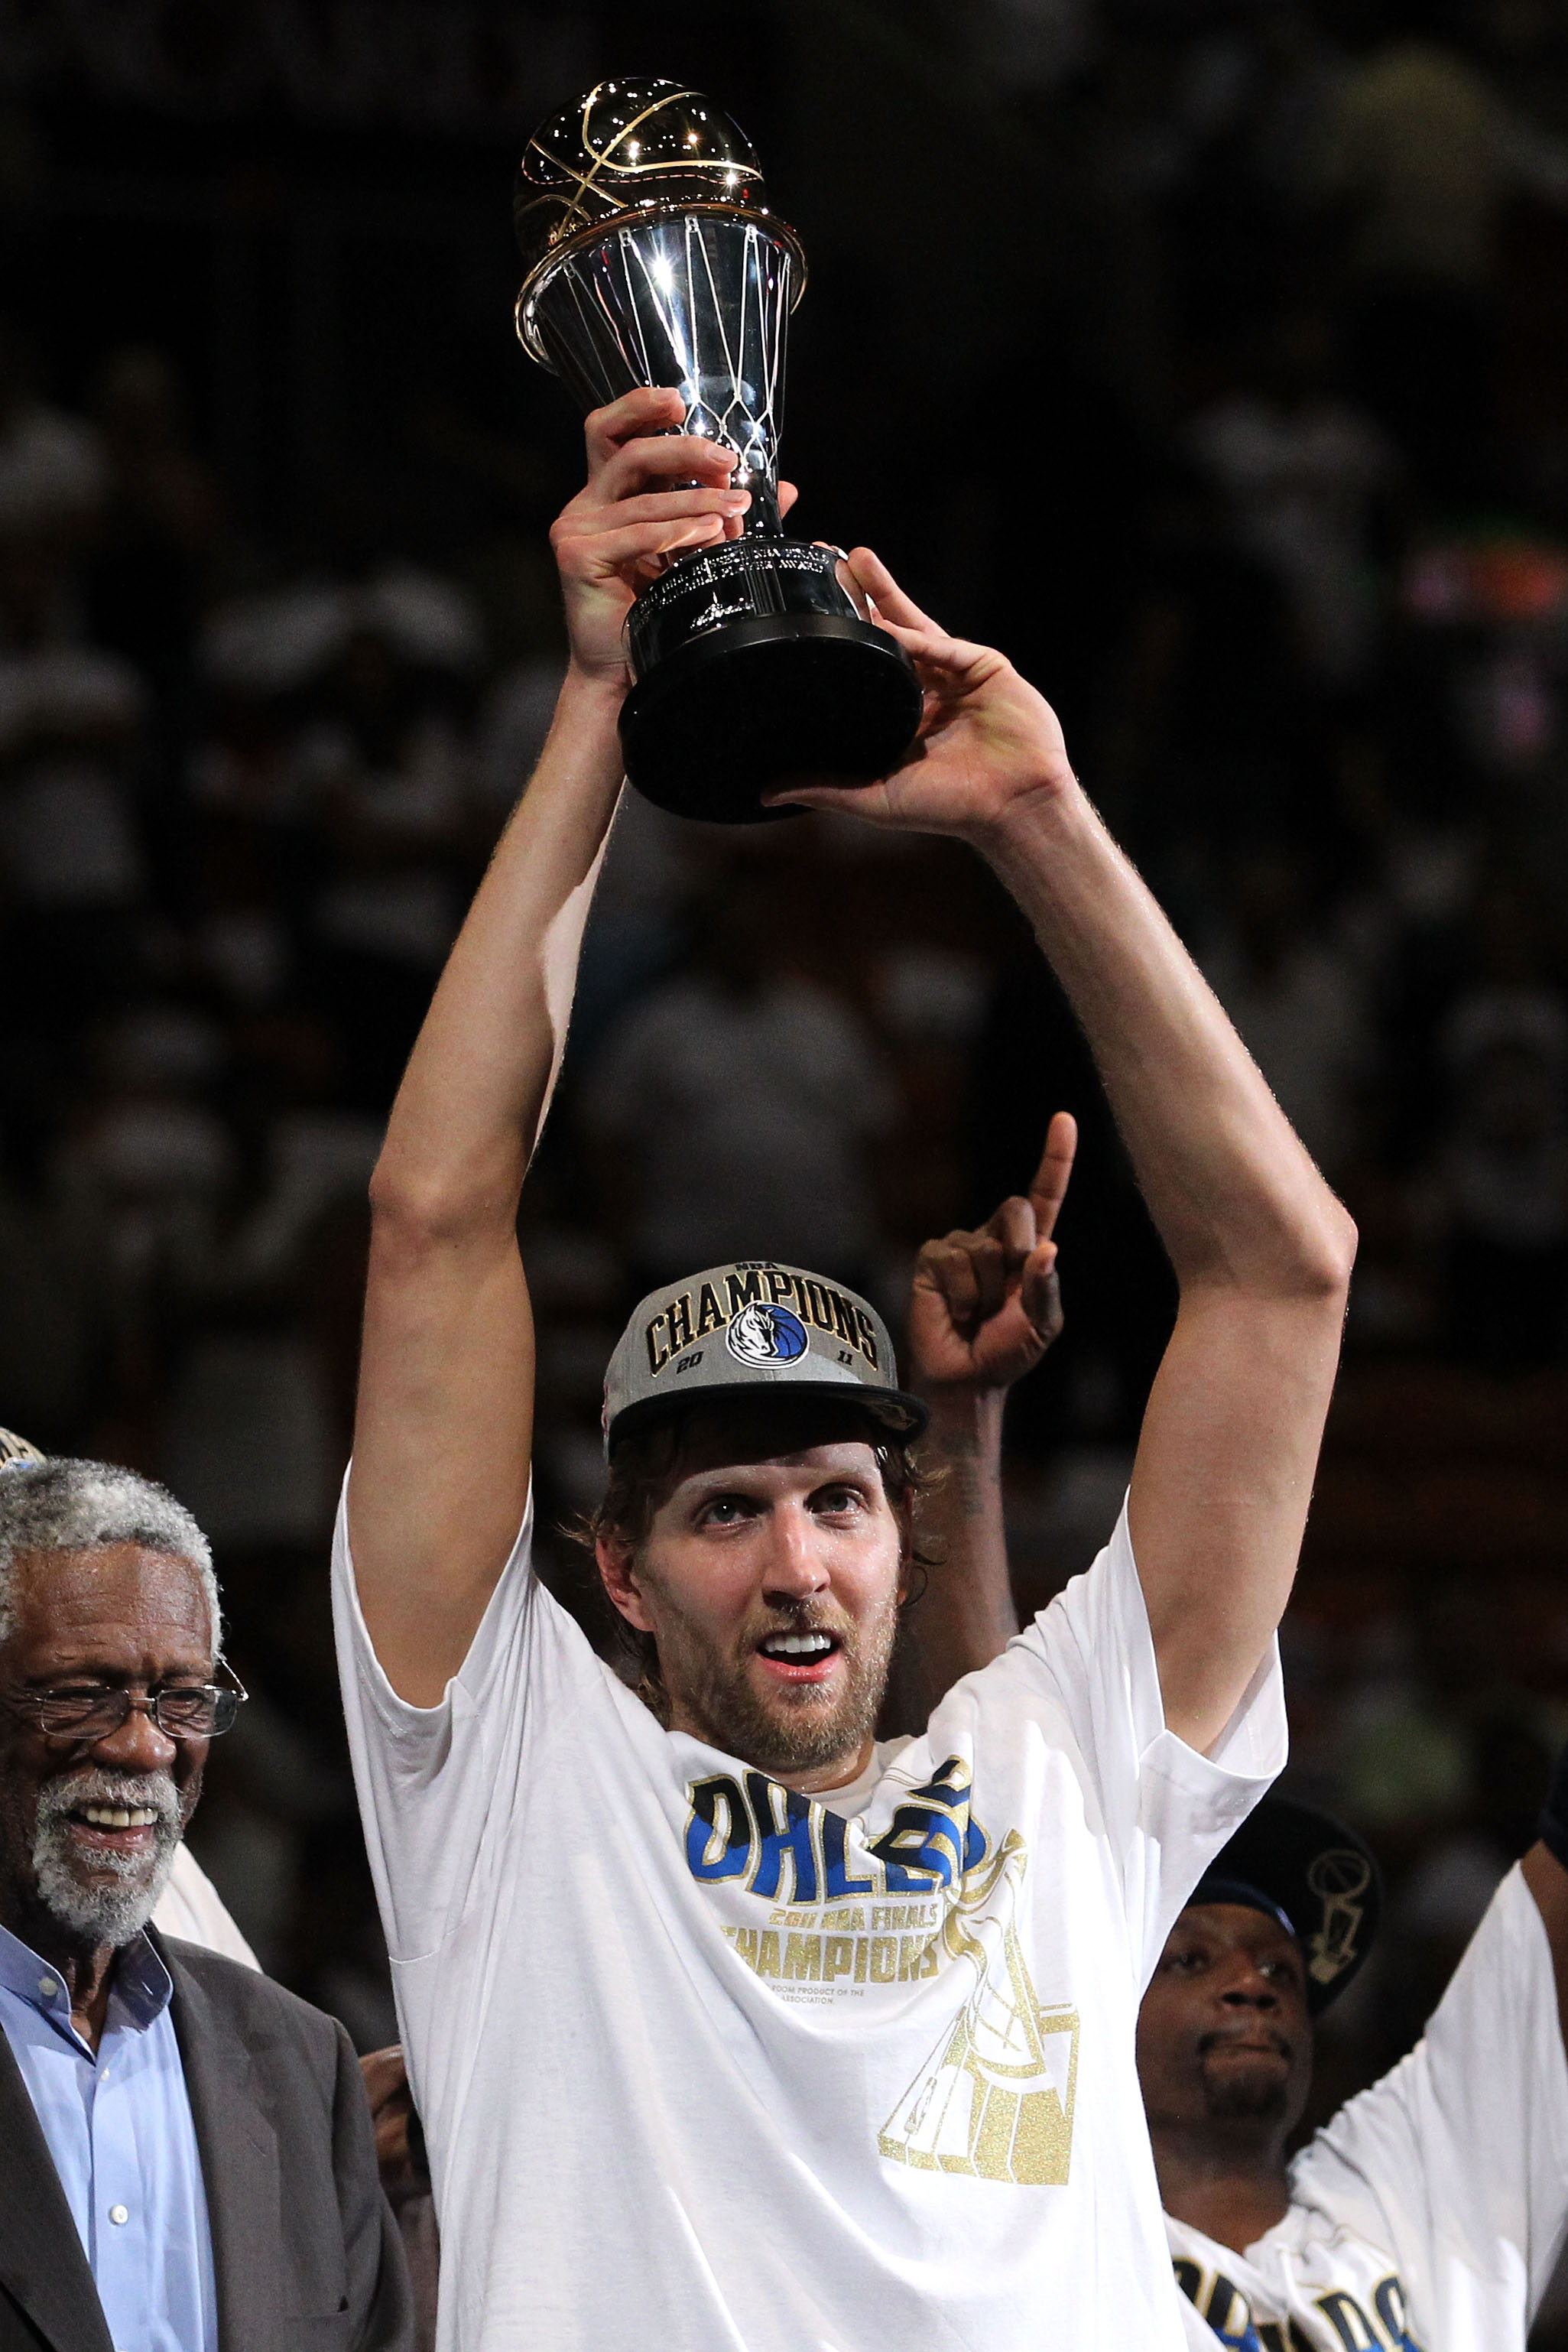 NBA 2011-12: Opening Odds to Win the NBA Championship